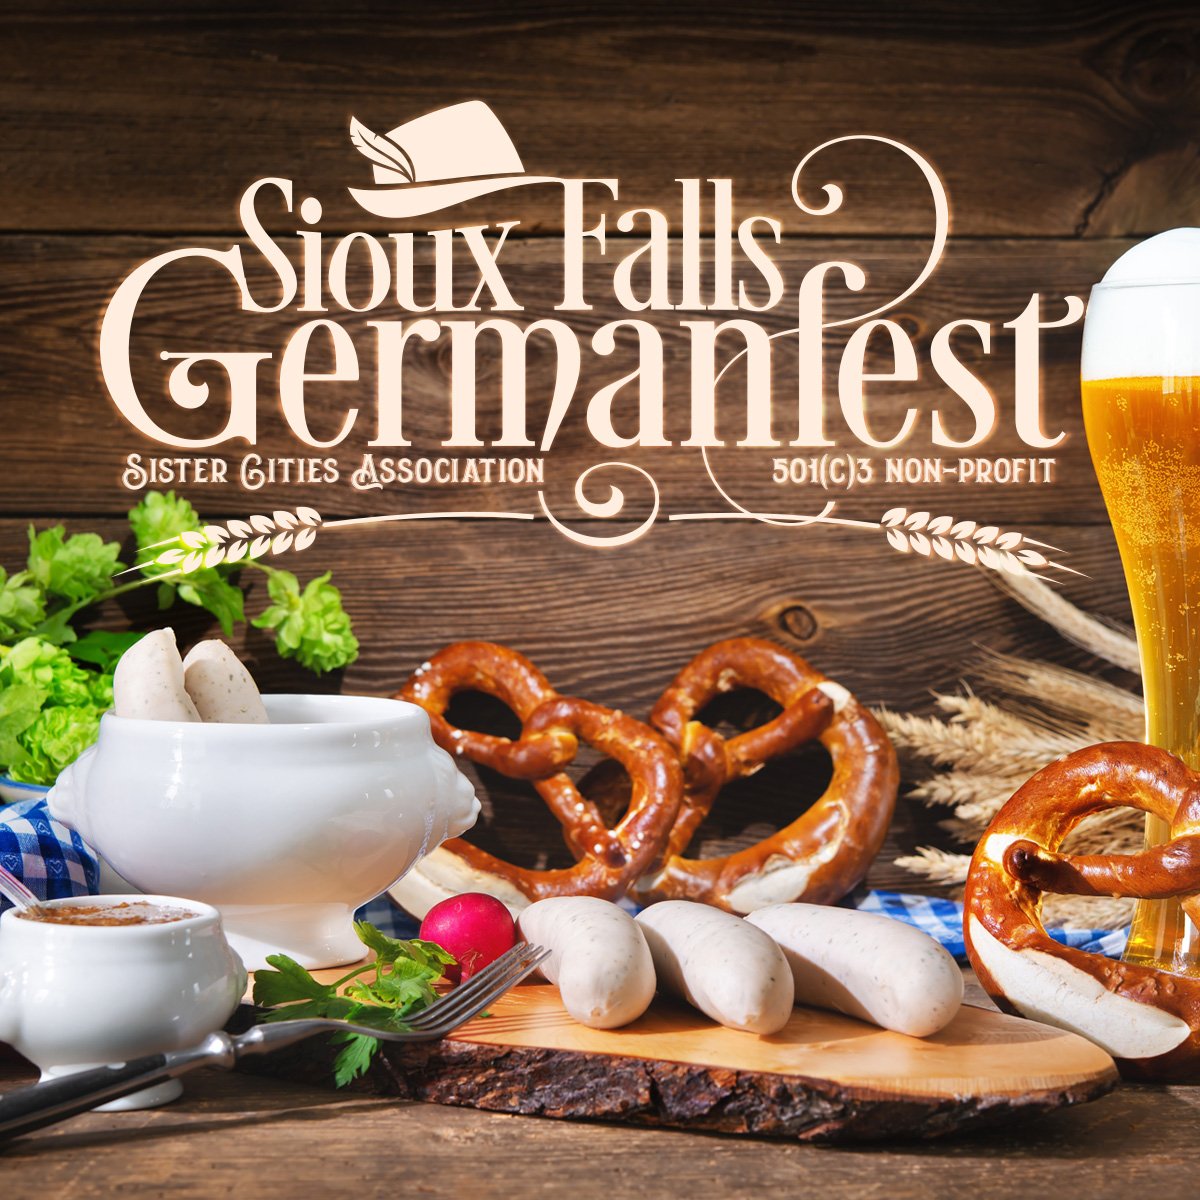 Germanfest Sioux Falls — Sister Cities Association of Sioux Falls